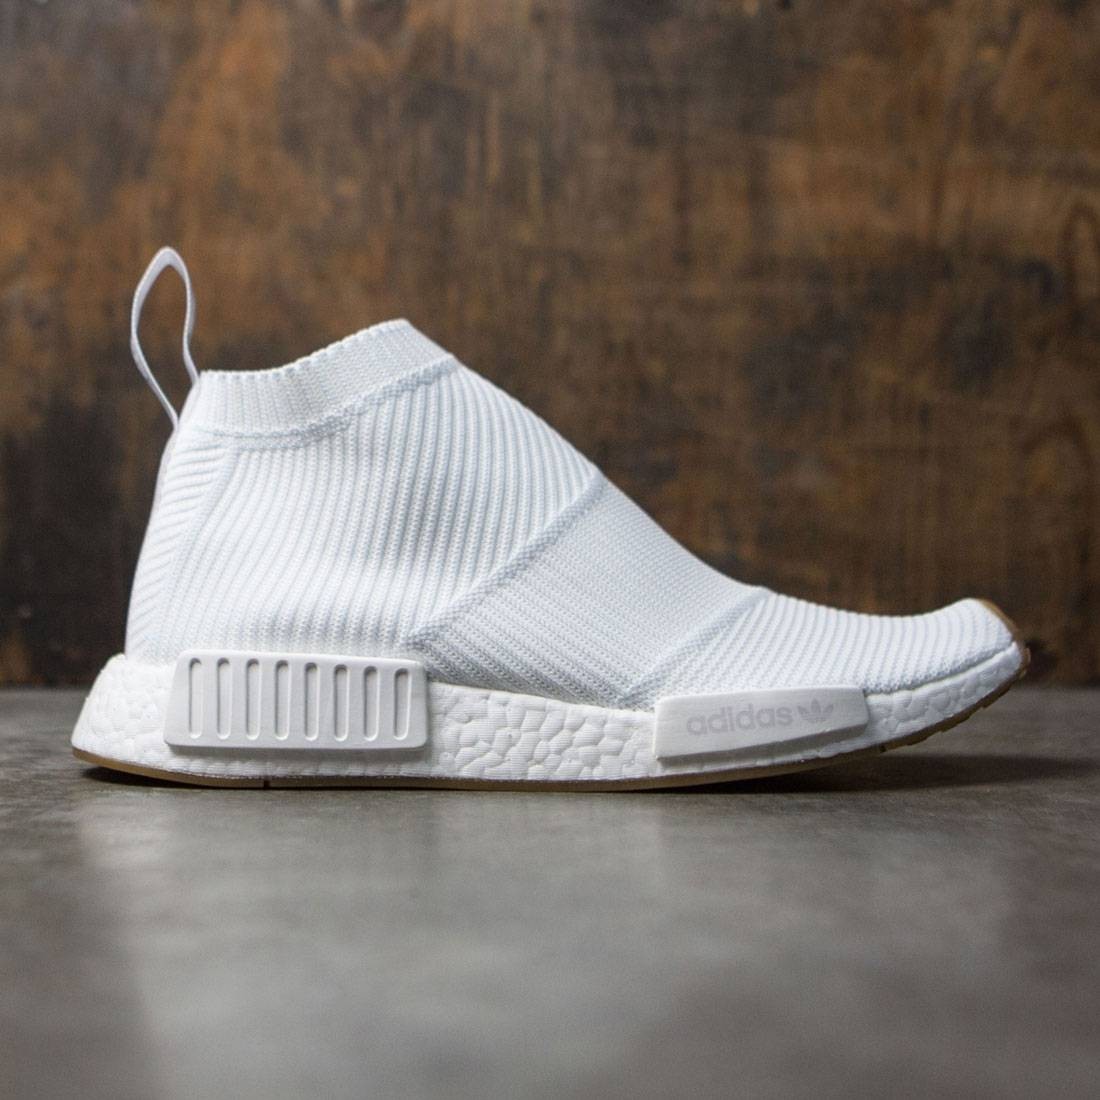 adidas nmd cs1 Blanche homme